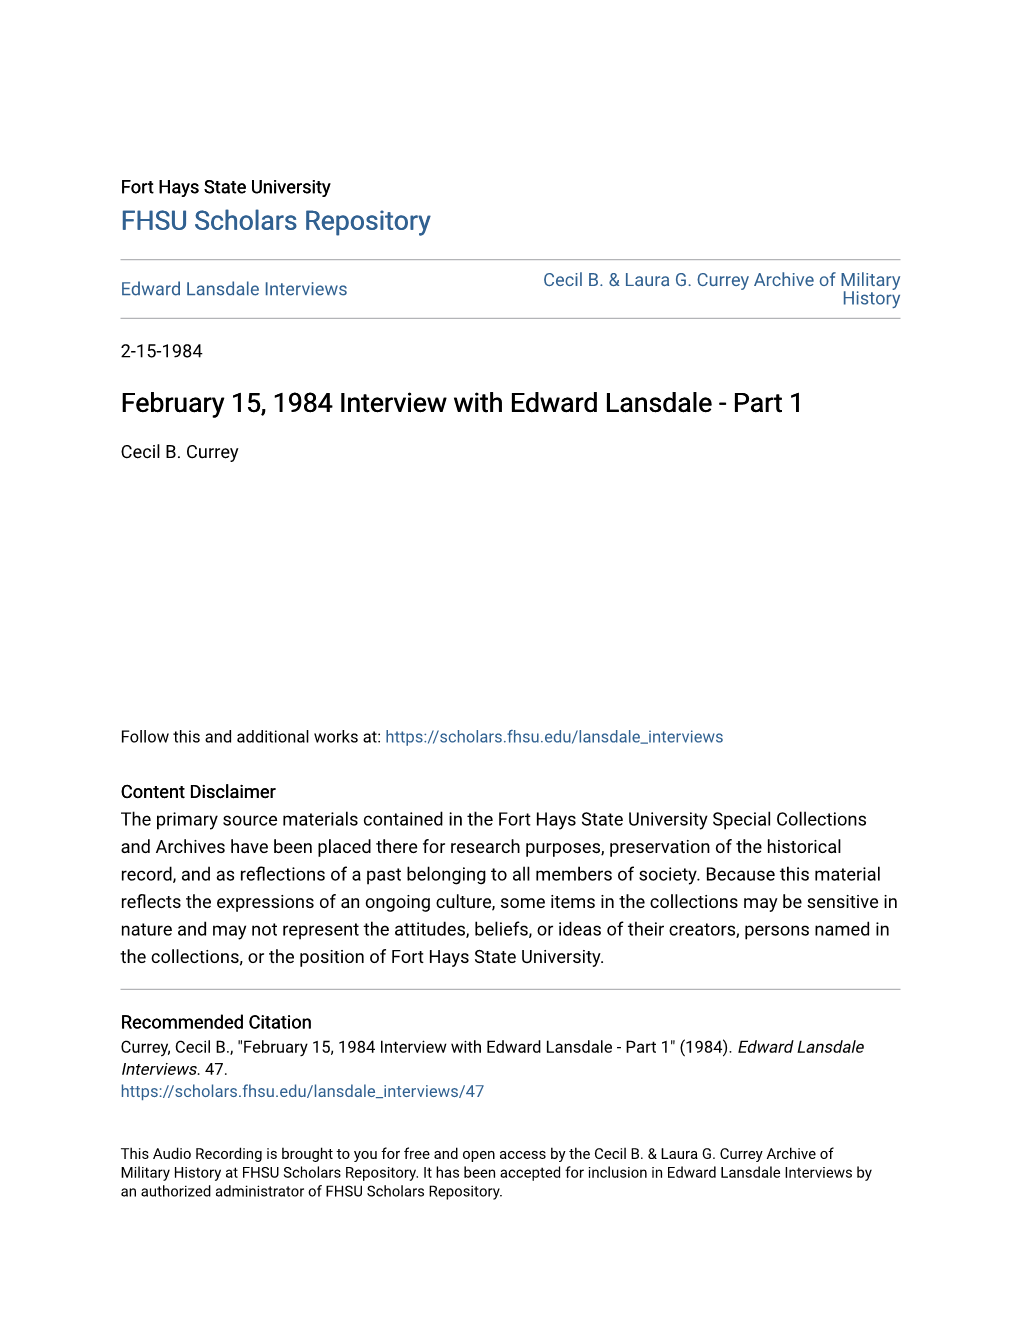 February 15, 1984 Interview with Edward Lansdale - Part 1